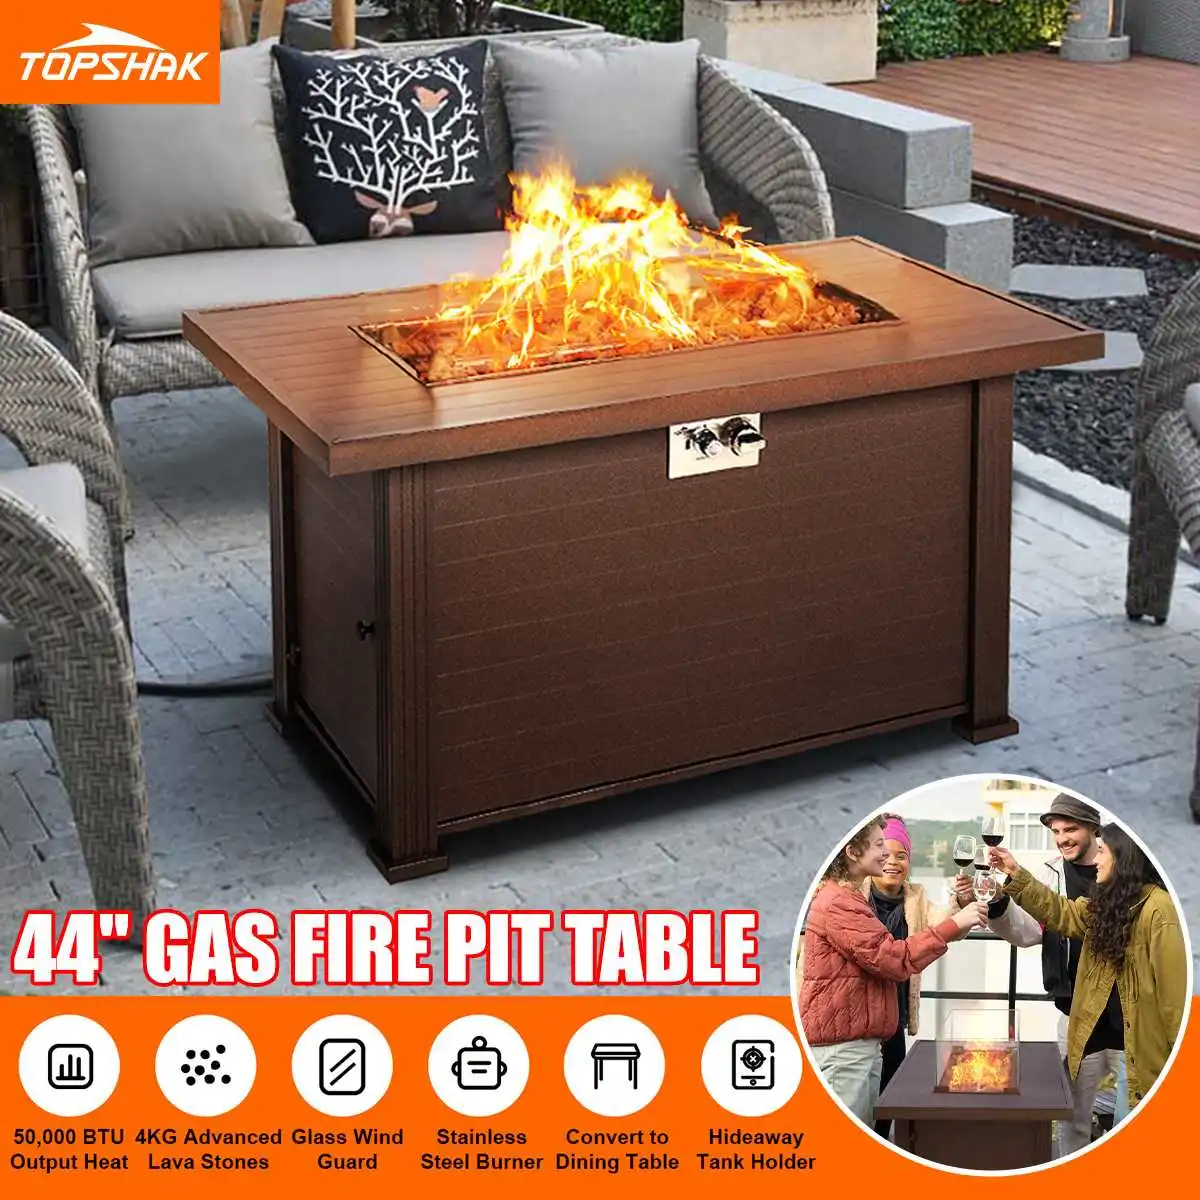 

Topshak-GF2 Grand Patio Outdoor Gas Fire Pit Table 44 Inch 50000 BTU Rectangle Patio Propane Fire Pit Table Camping Stand Stove